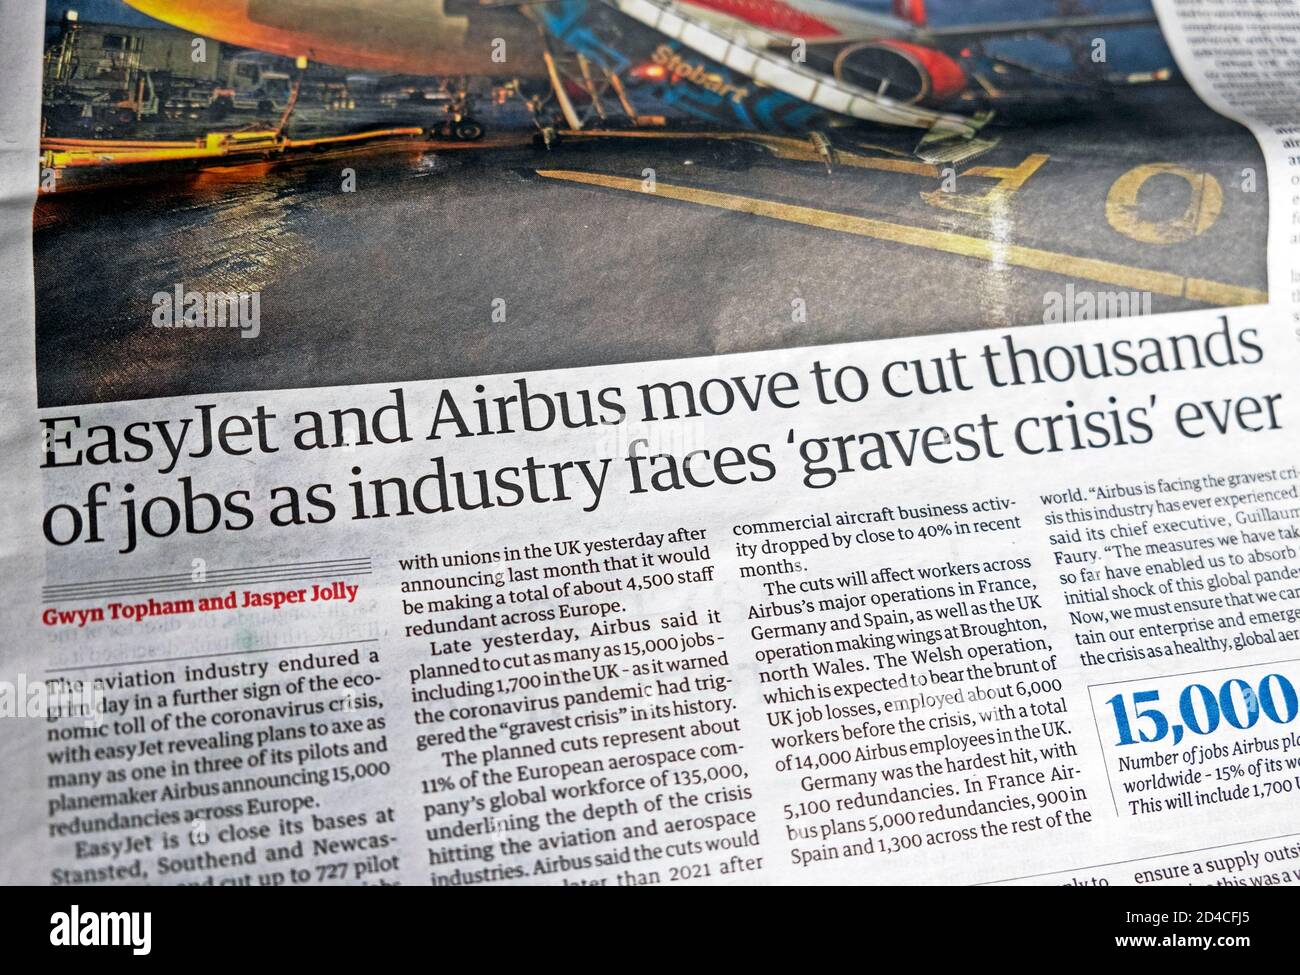 'EasyjJet and Airbus move to cut thousands of jobs as industry faces 'gravest crisis ever' newspaper headline inside Guardian paper London England UK Stock Photo